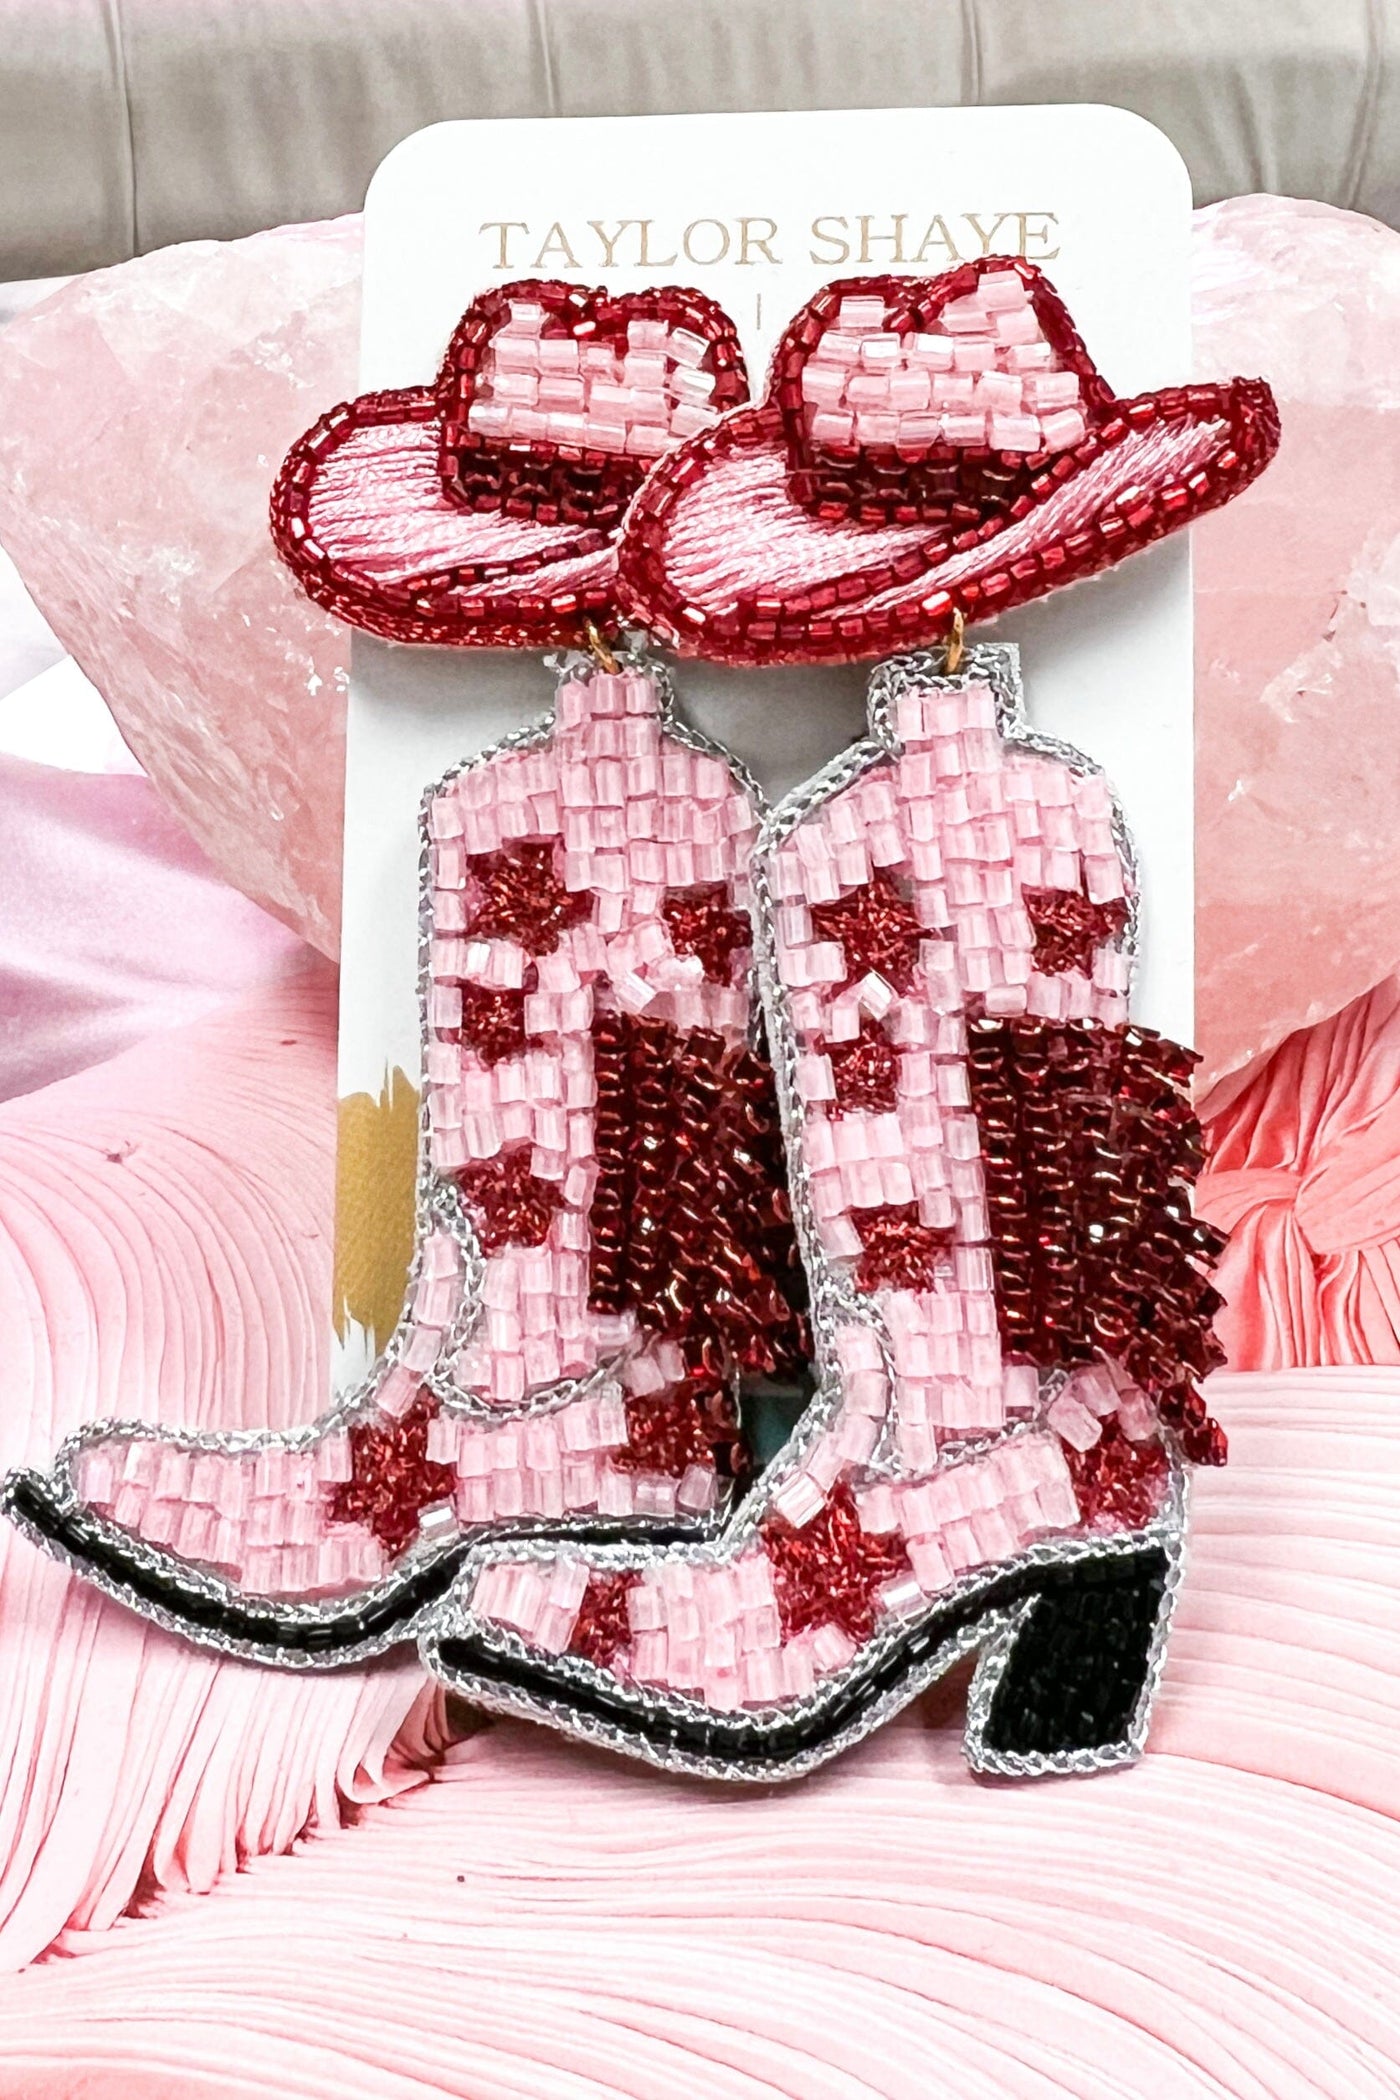 Beaded Cowboy Boot Earrings - TAYLOR SHAYE: Fuchsia/Light Pink - Bella and Bloom Boutique